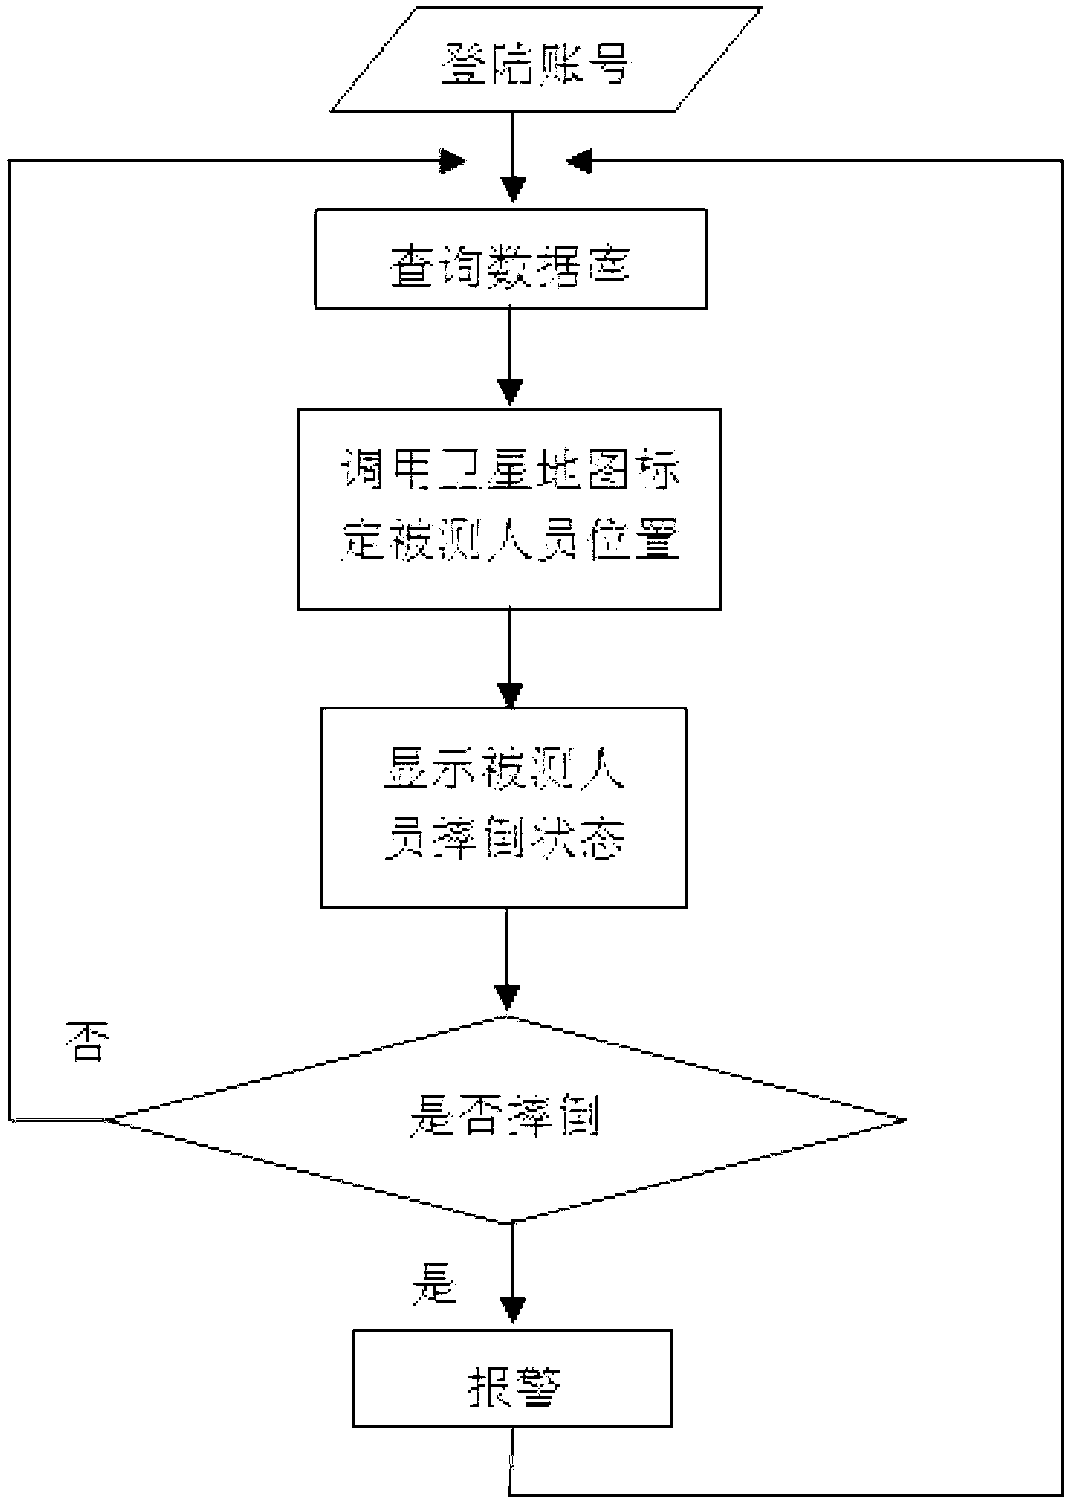 Tumble detecting and positioning system and method